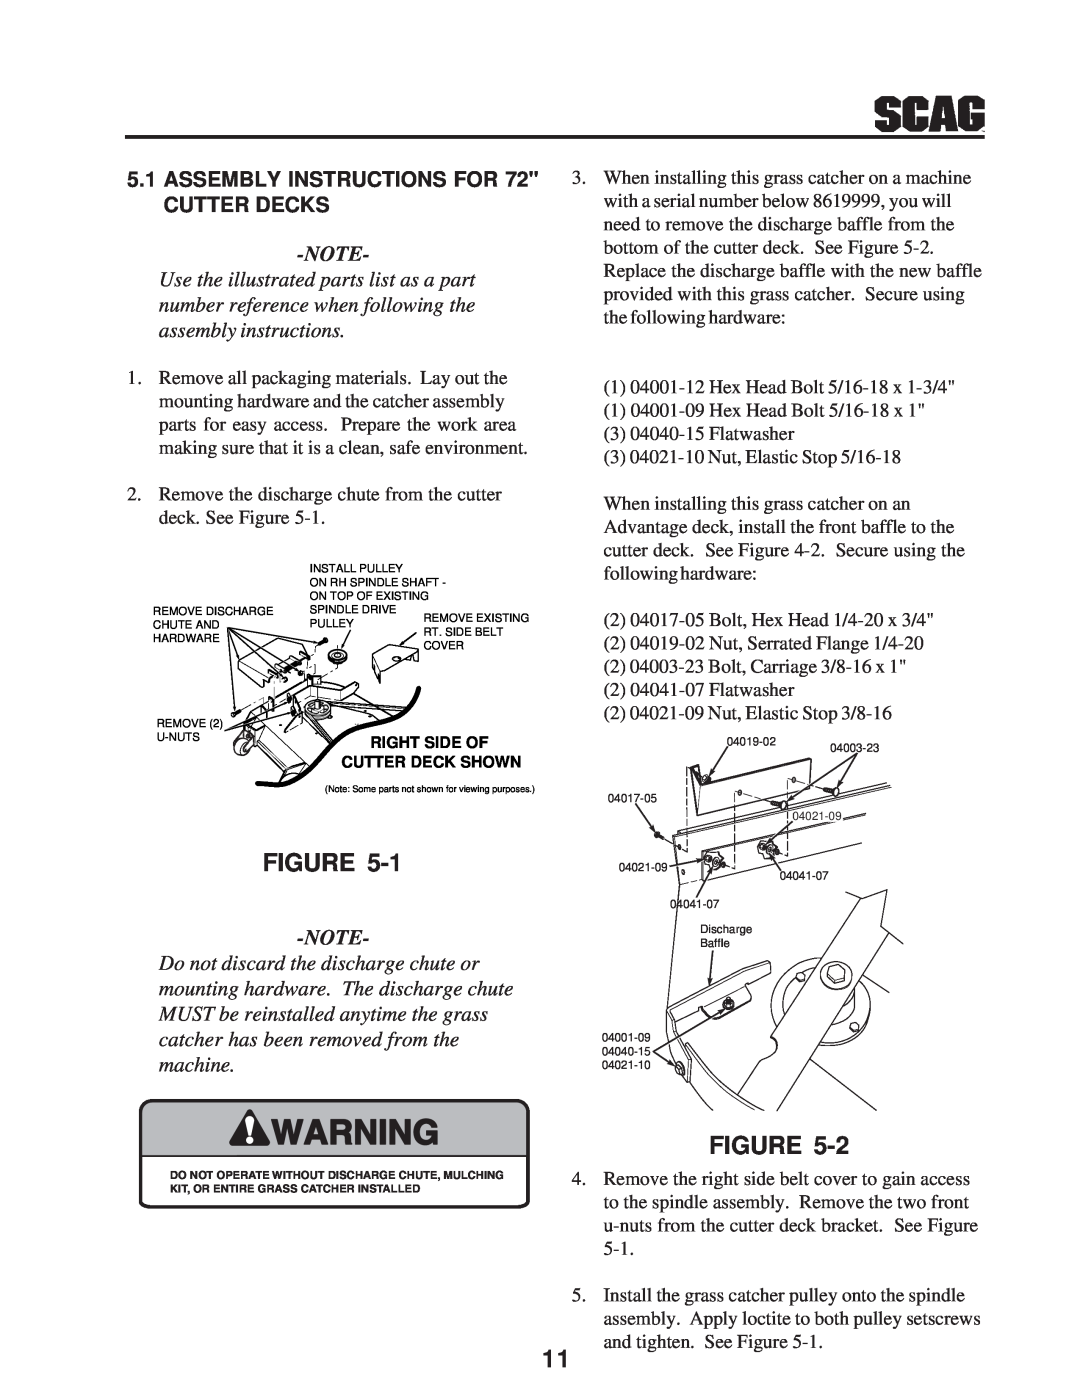 Scag Power Equipment GC-STT-CS manual ASSEMBLY INSTRUCTIONS FOR 72 CUTTER DECKS, Use the illustrated parts list as a part 